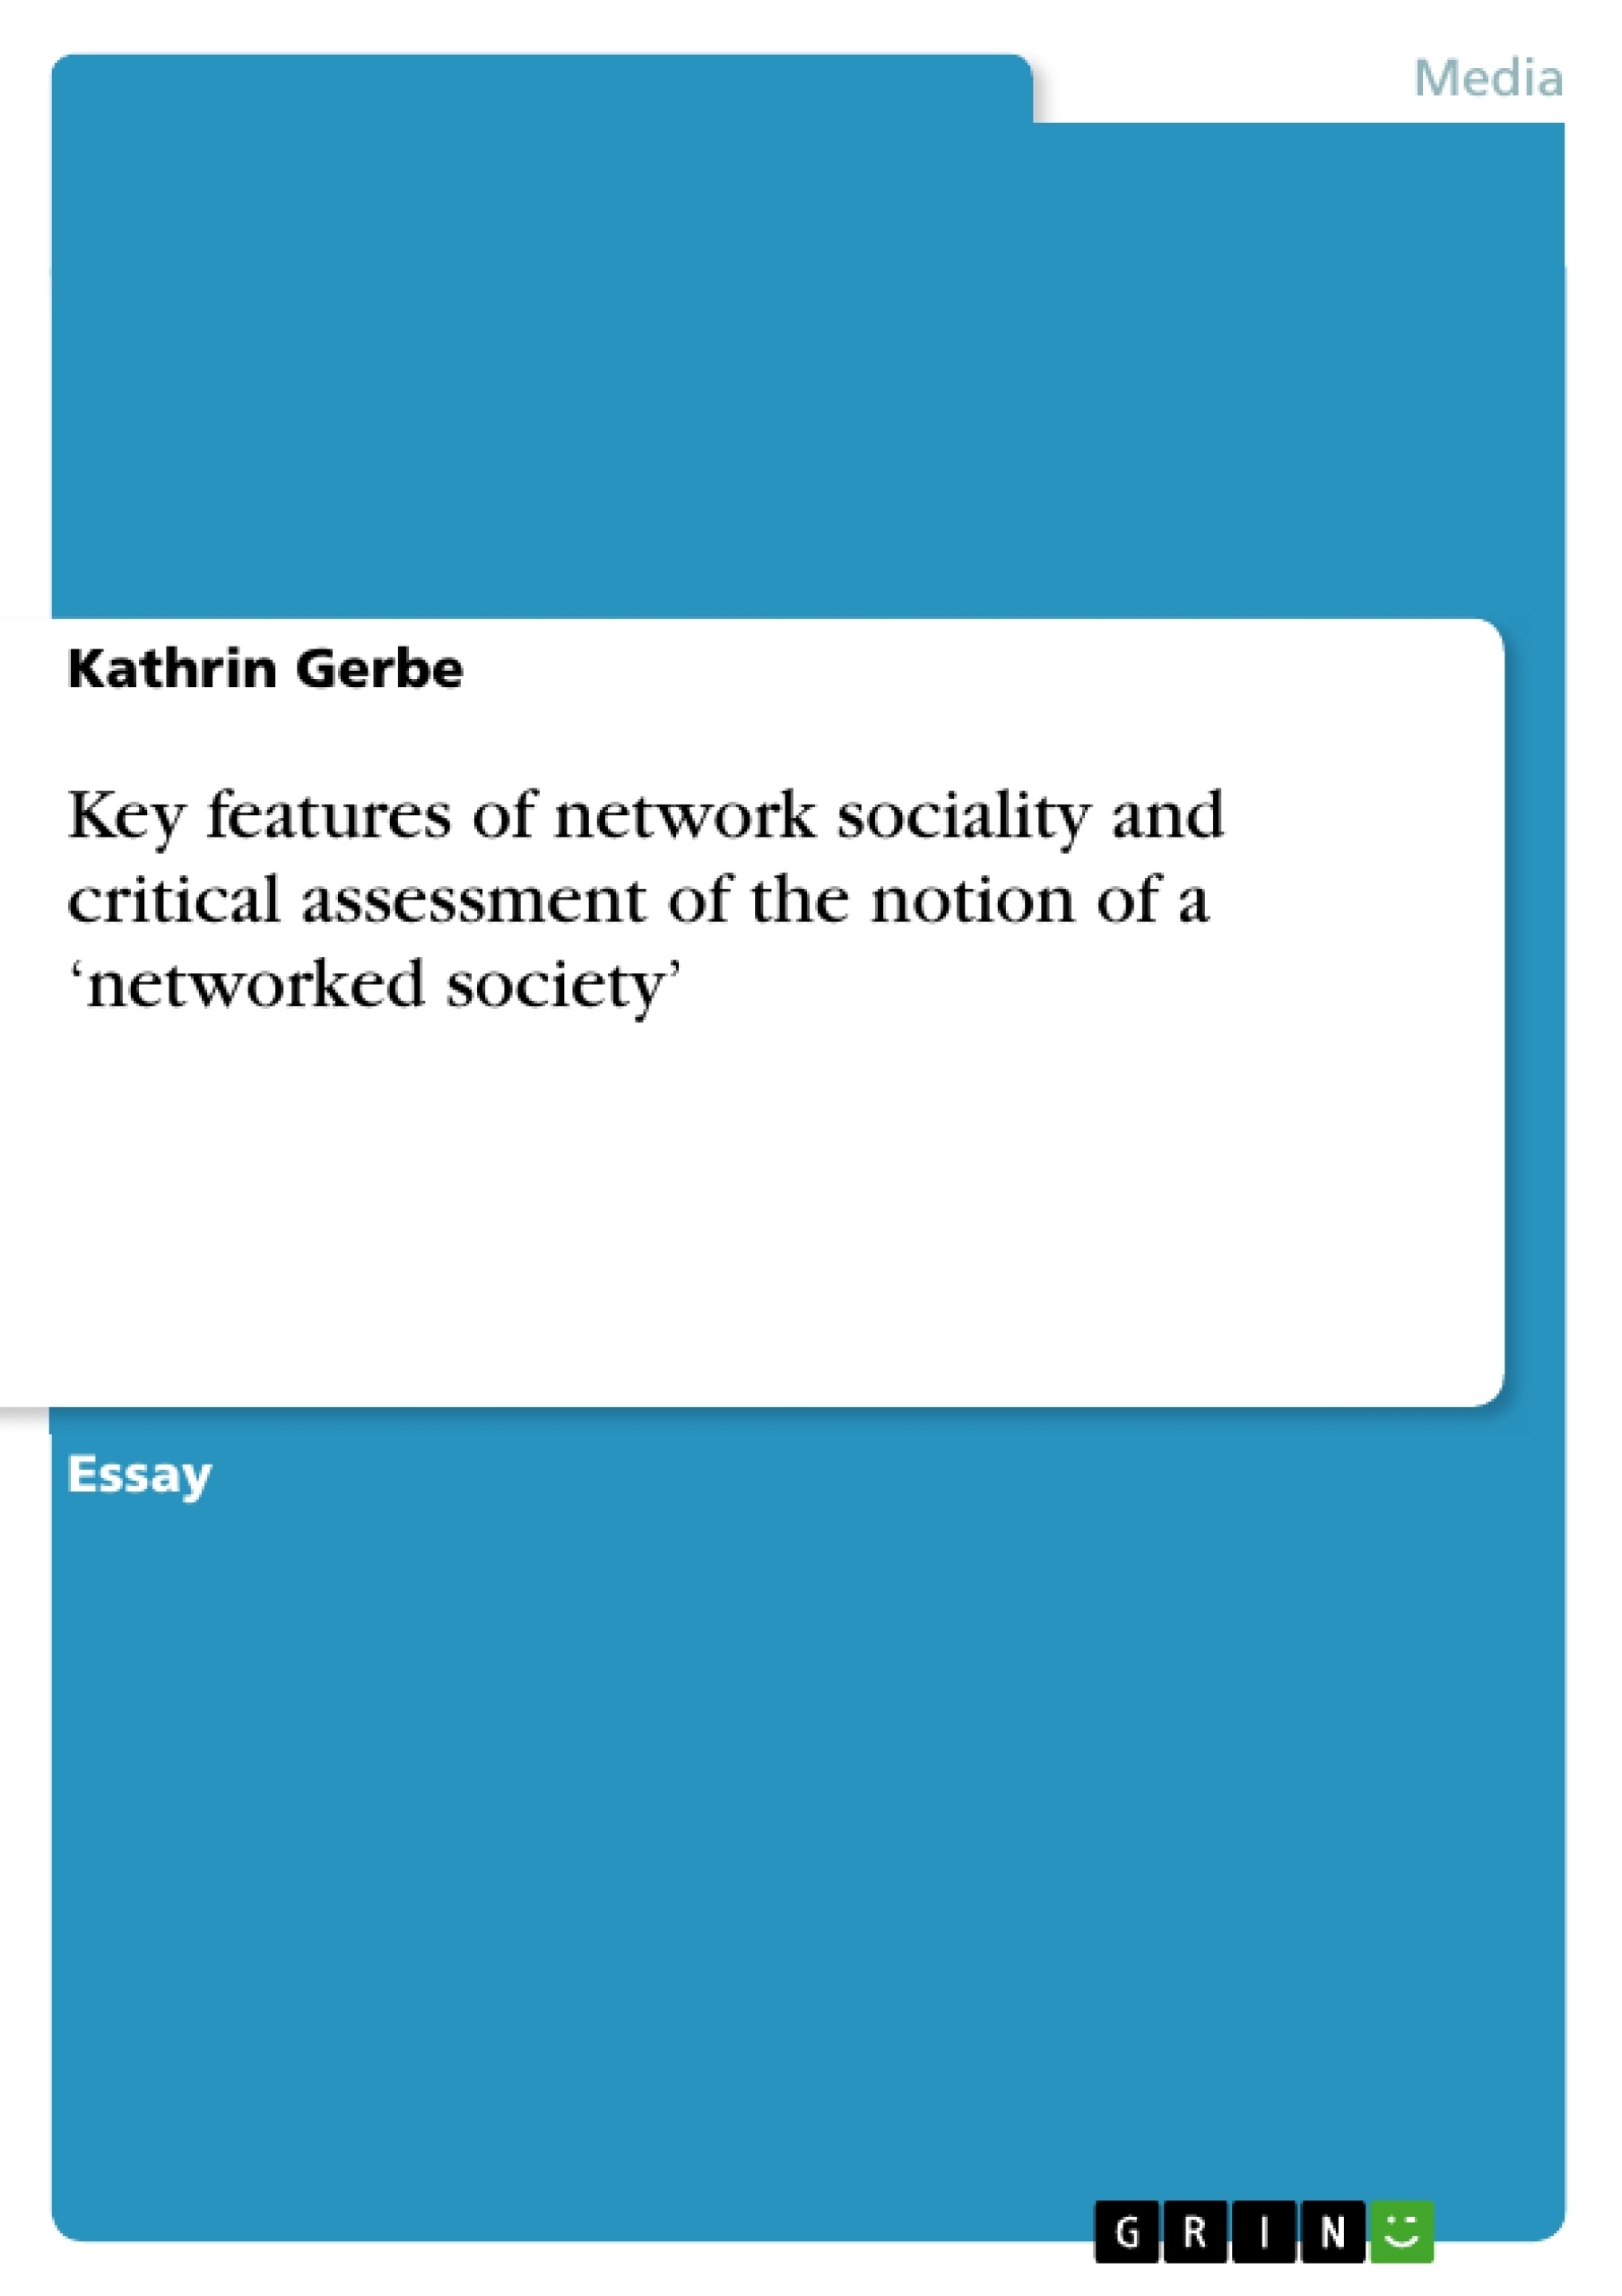 Título: Key features of network sociality and critical assessment of the notion of a ‘networked society’